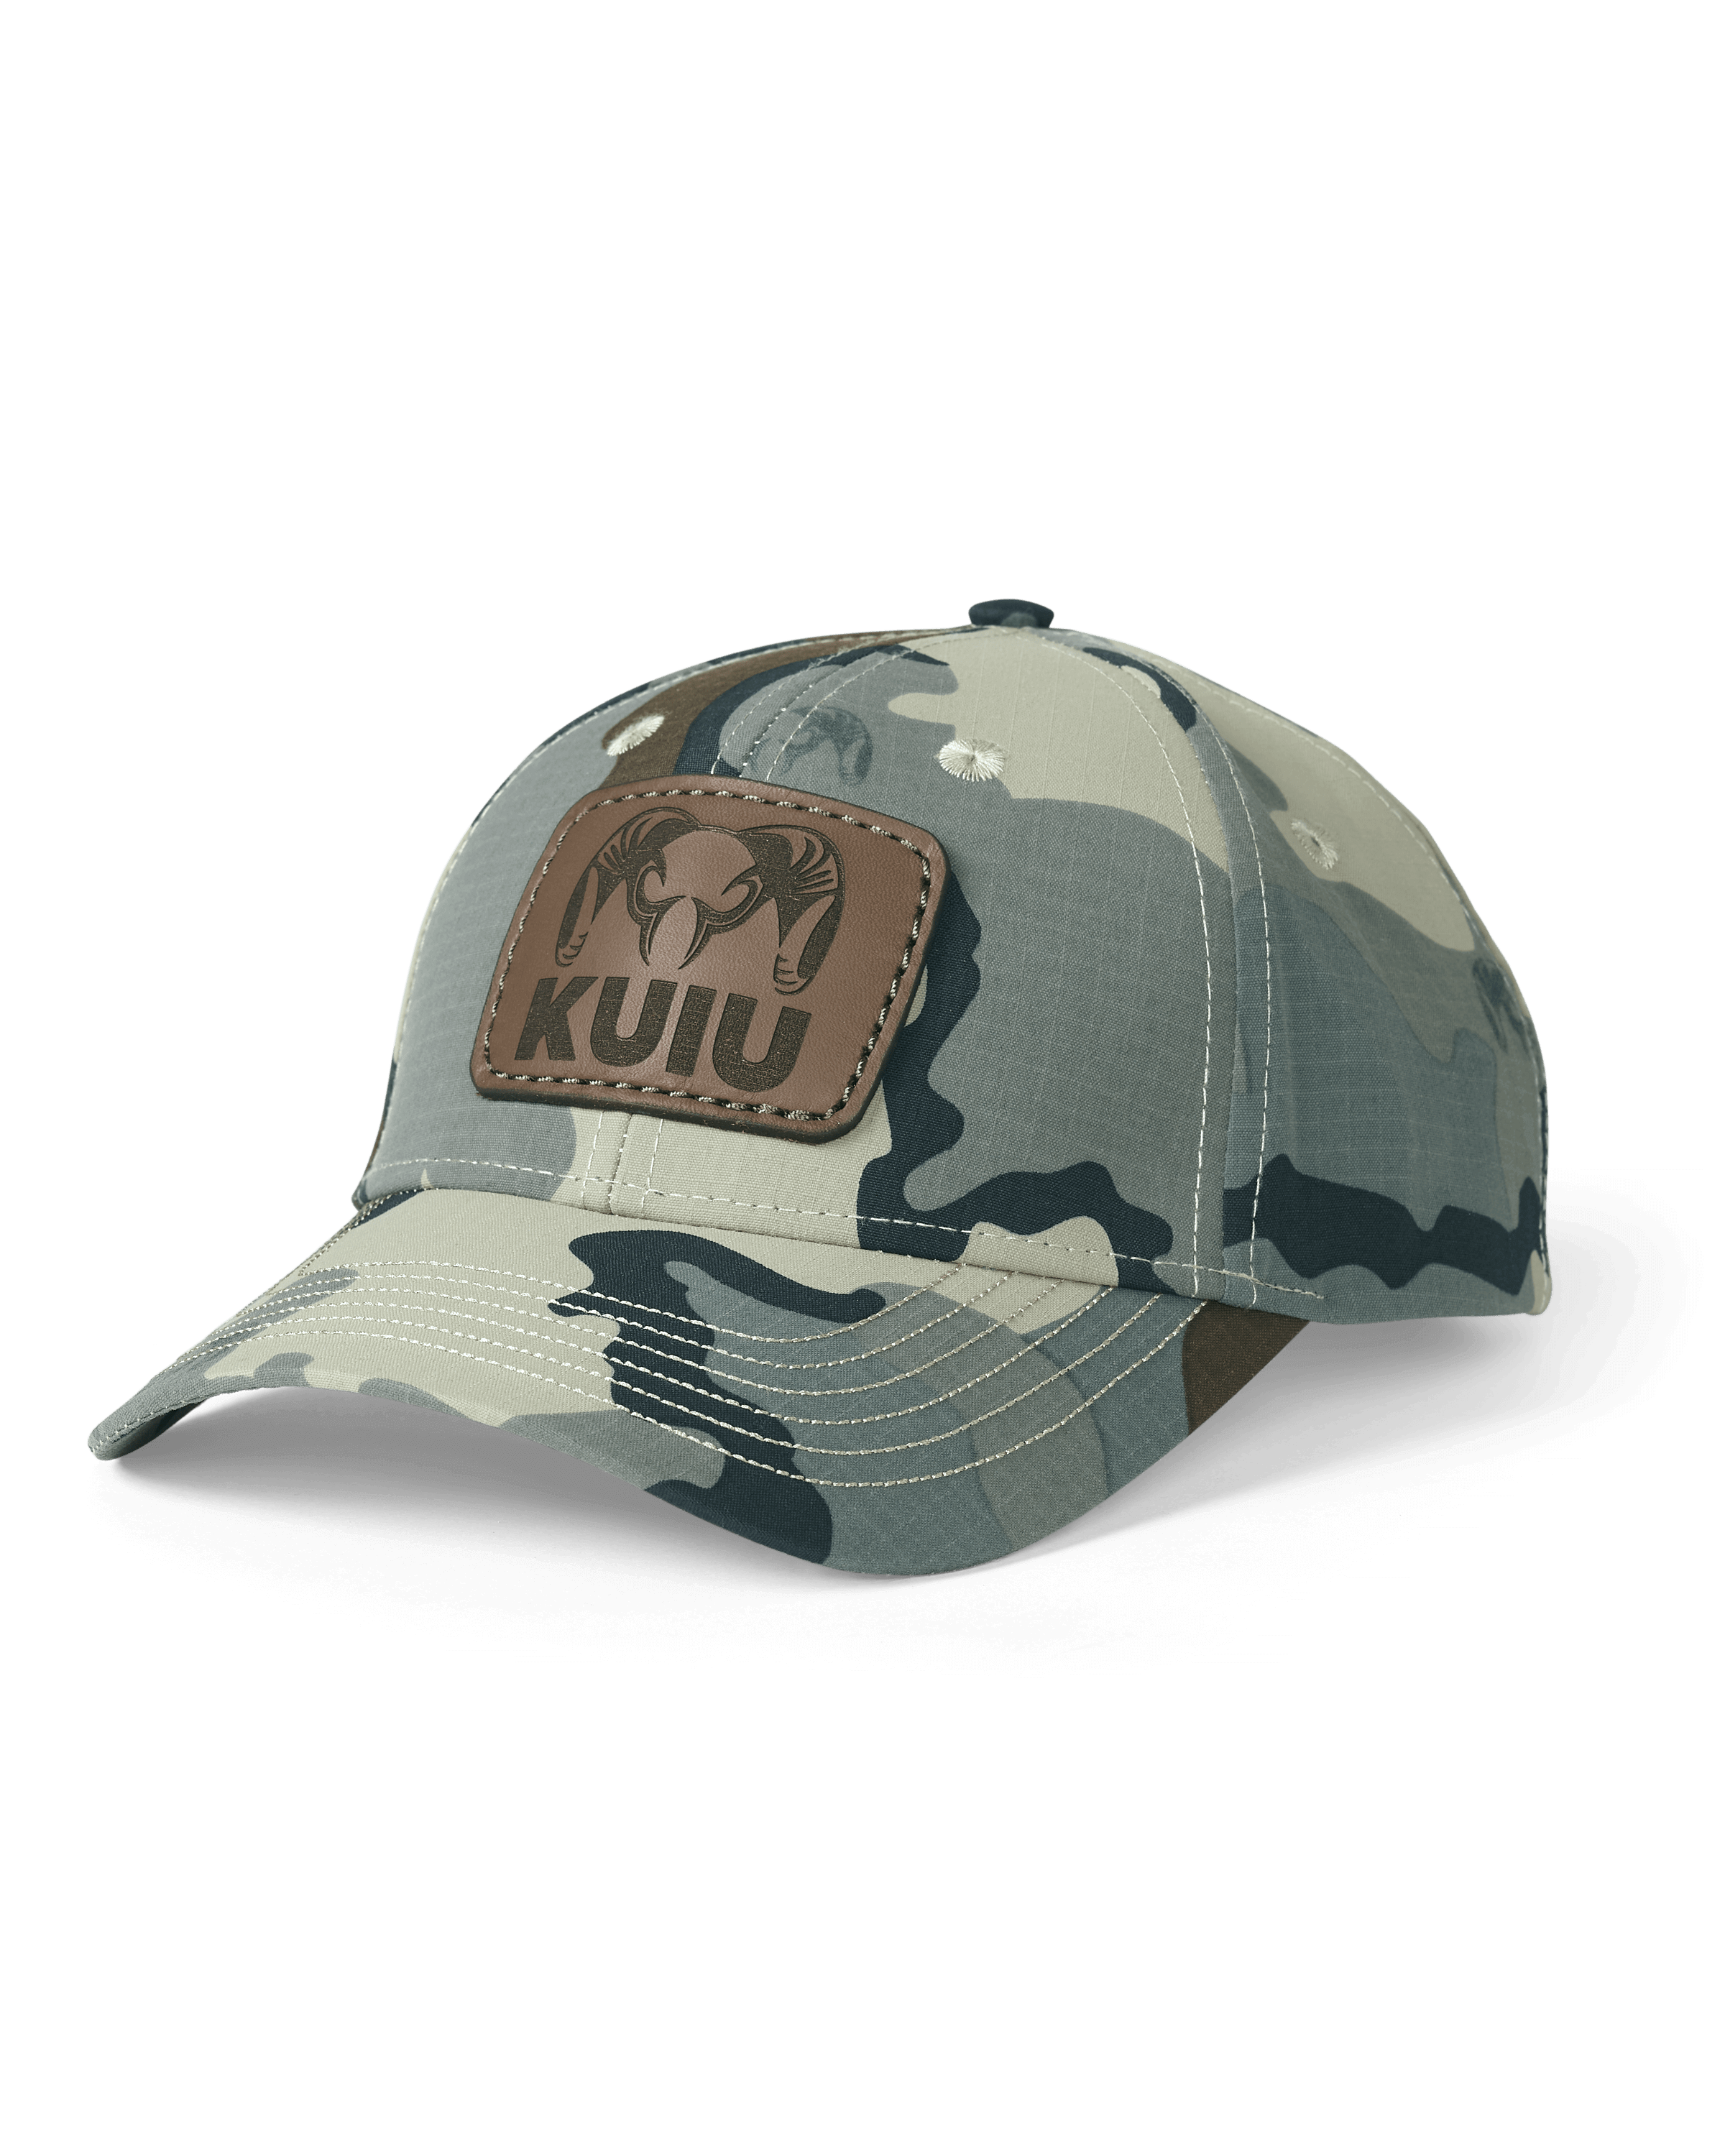 KUIU PRO Leather Patch Hat in Vias